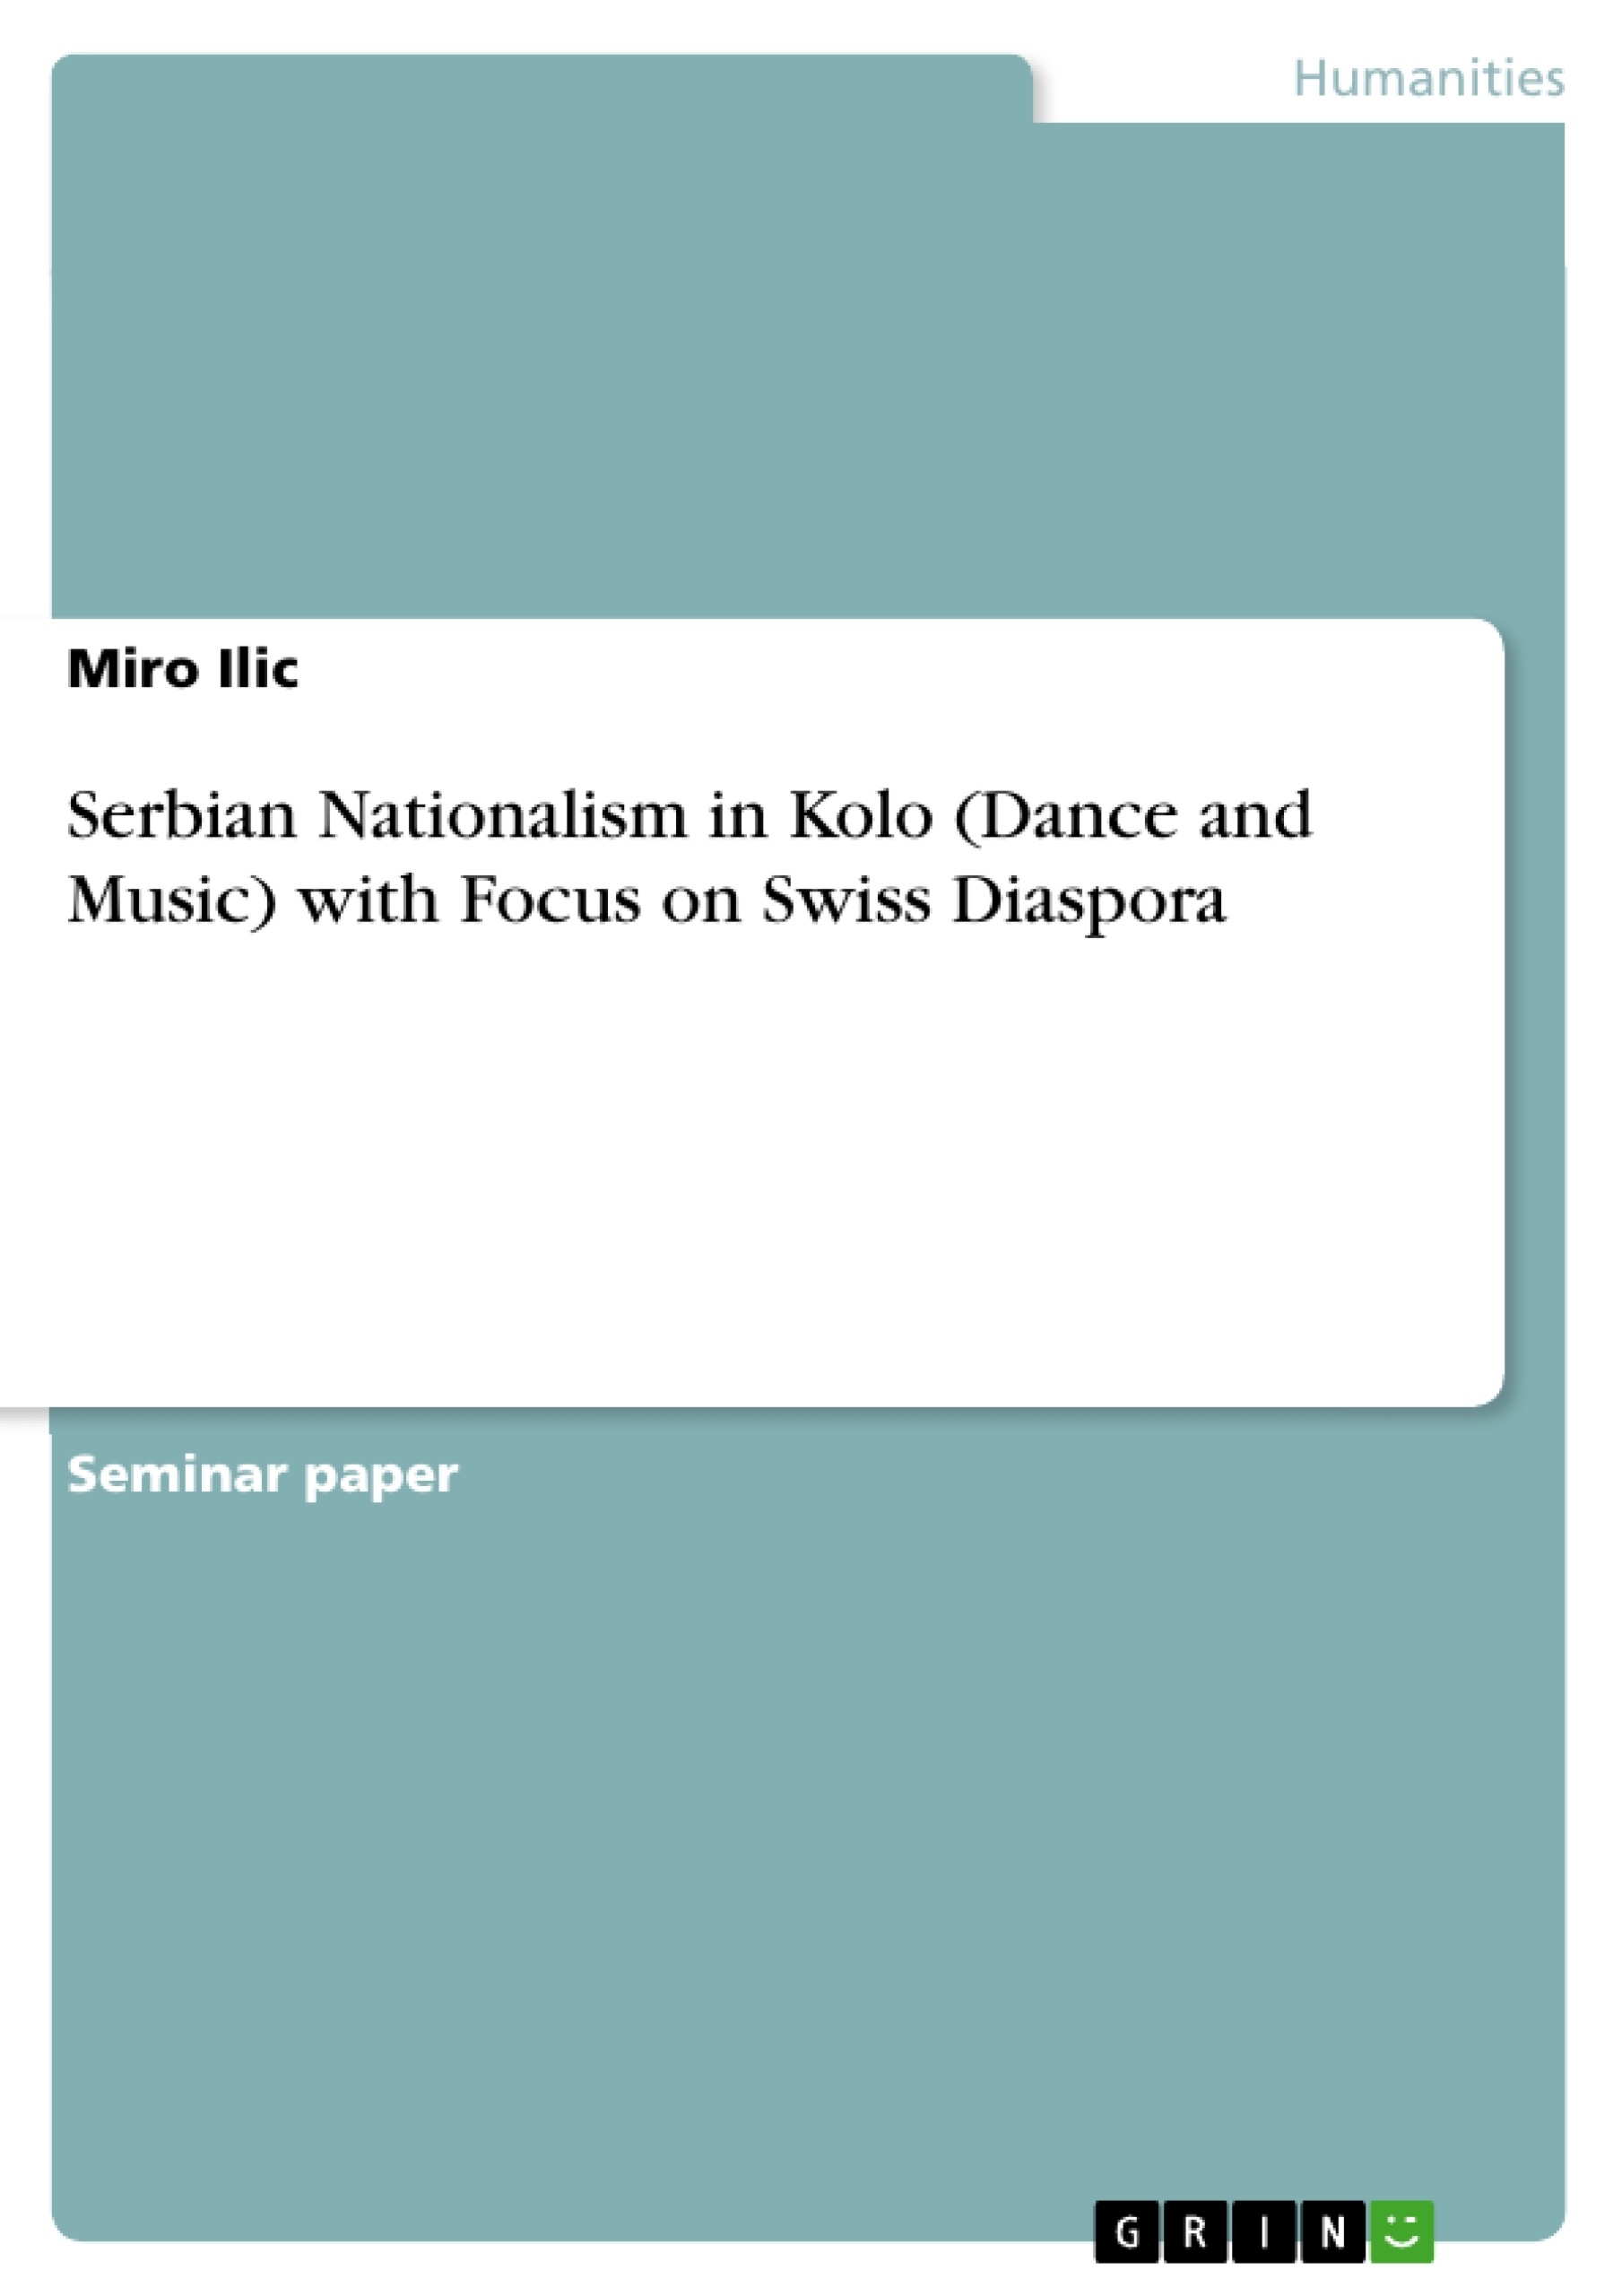 Title: Serbian Nationalism in Kolo (Dance and Music) with Focus on Swiss Diaspora